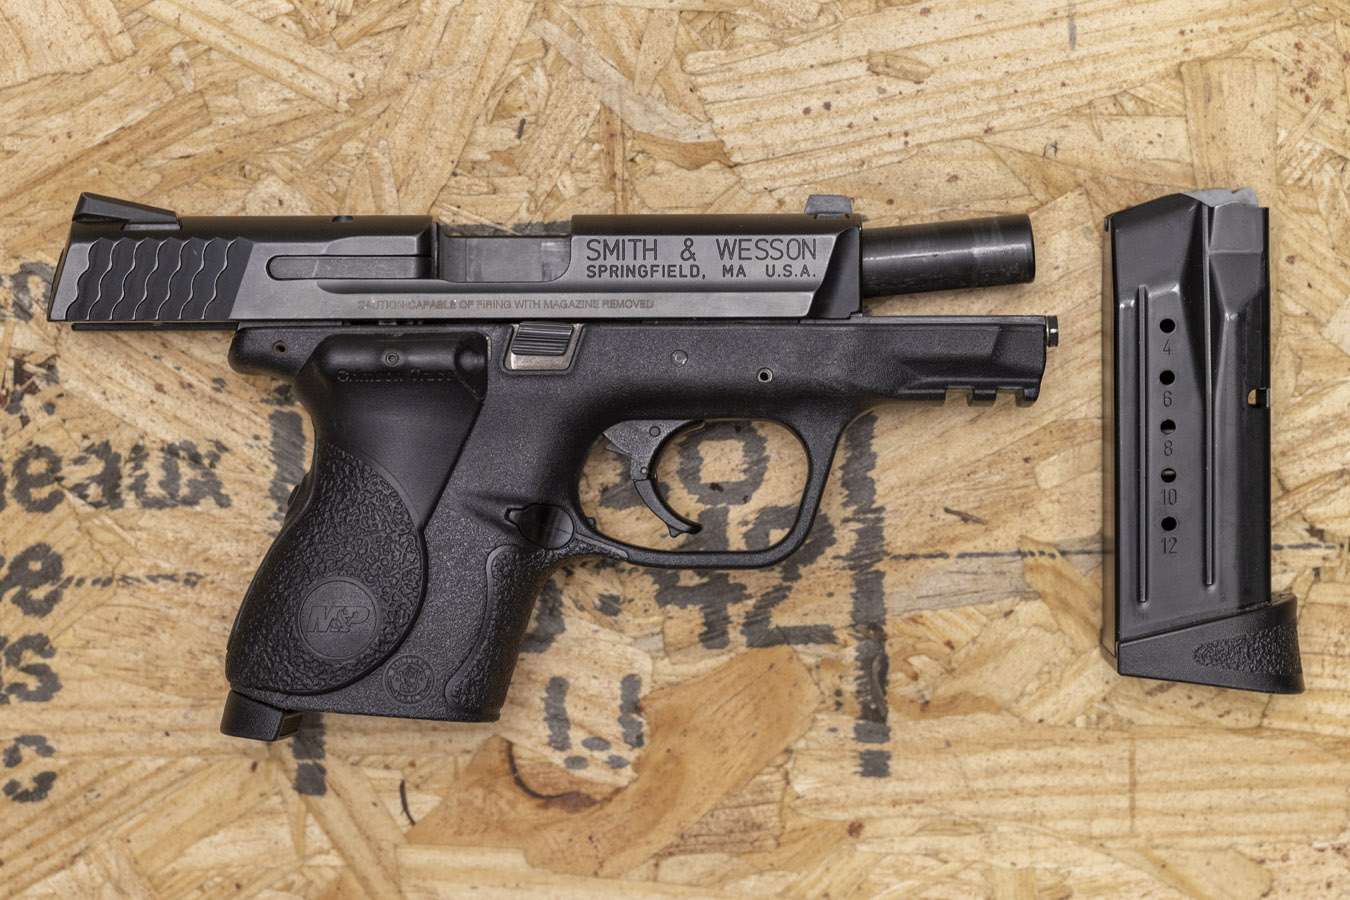 MP 9C 9MM POLICE TRADE-IN PISTOL WITH GRIP LASER